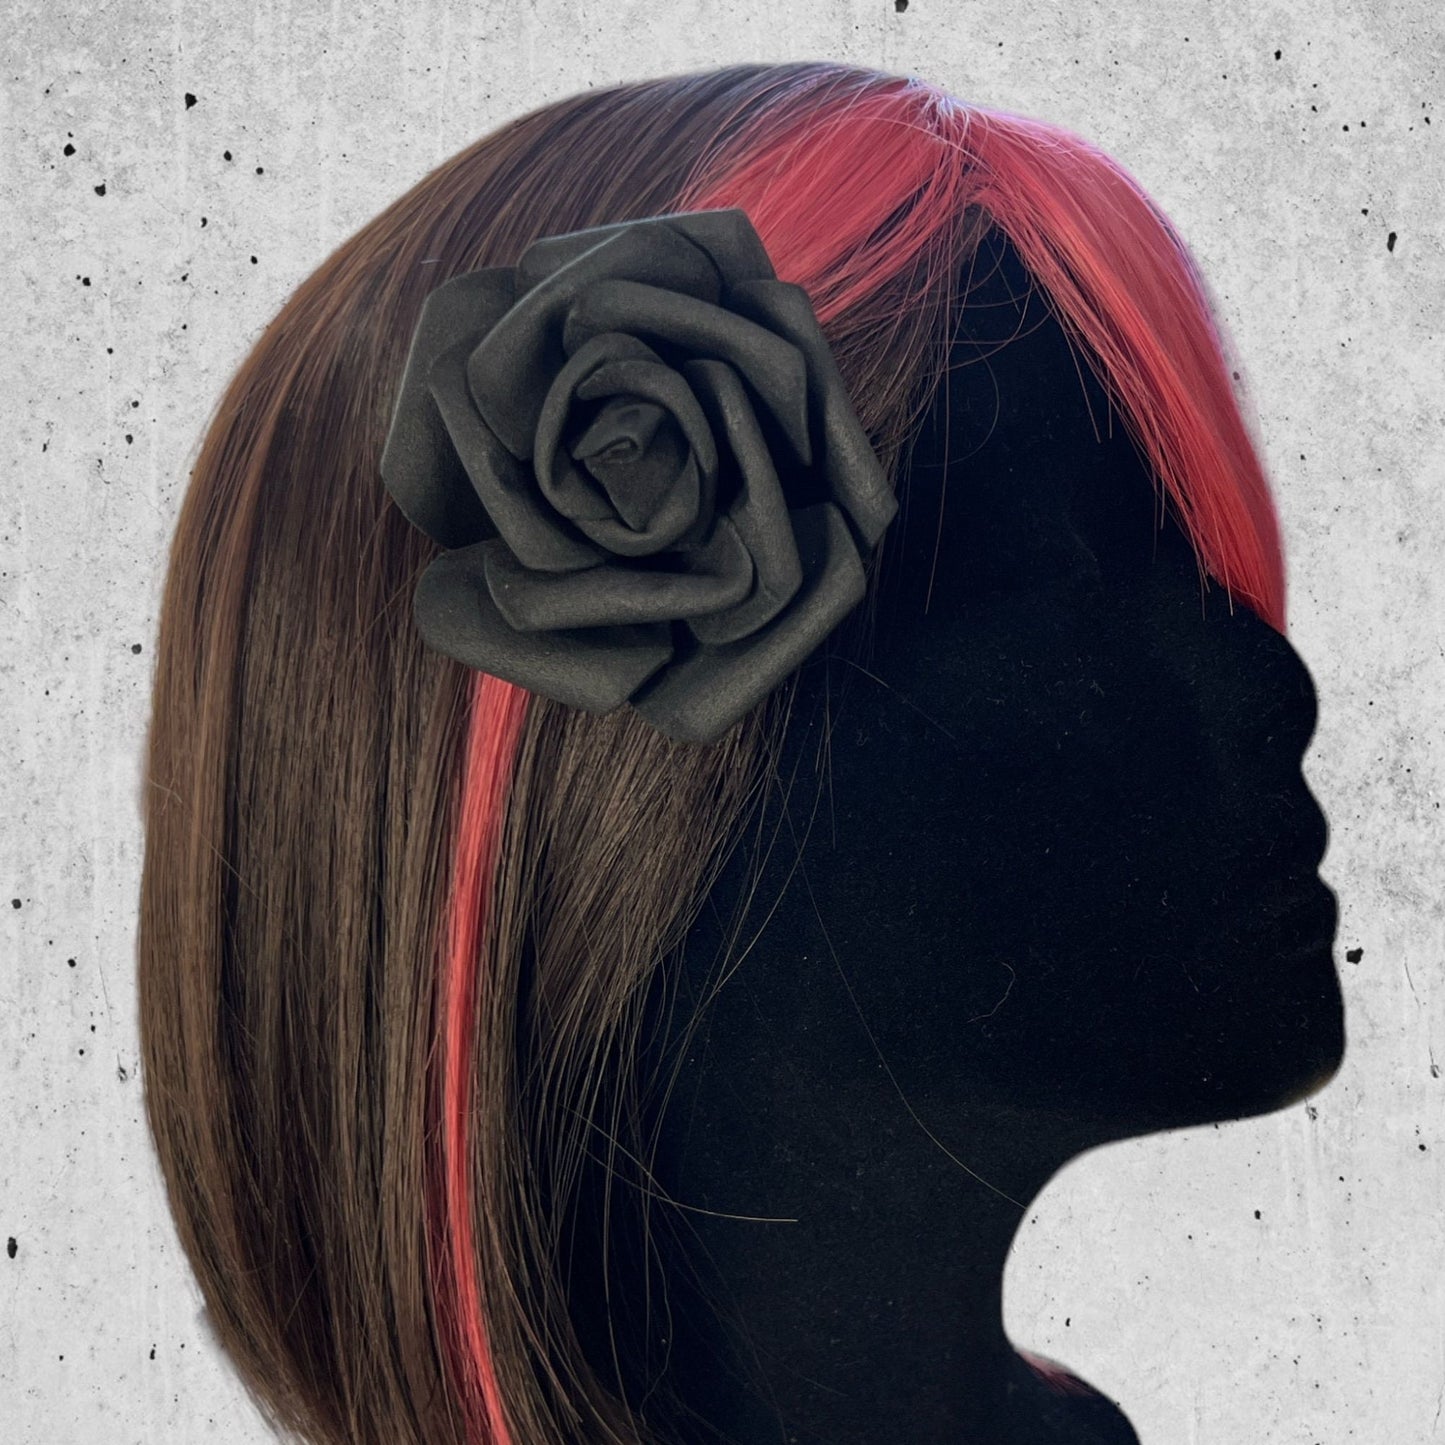 Oversized black rose hairpins by Extra Kitsch, perfect for gothic, romantic, and feminine styles. Lightweight foam for a comfortable and bold look. Displayed on a mannequin.